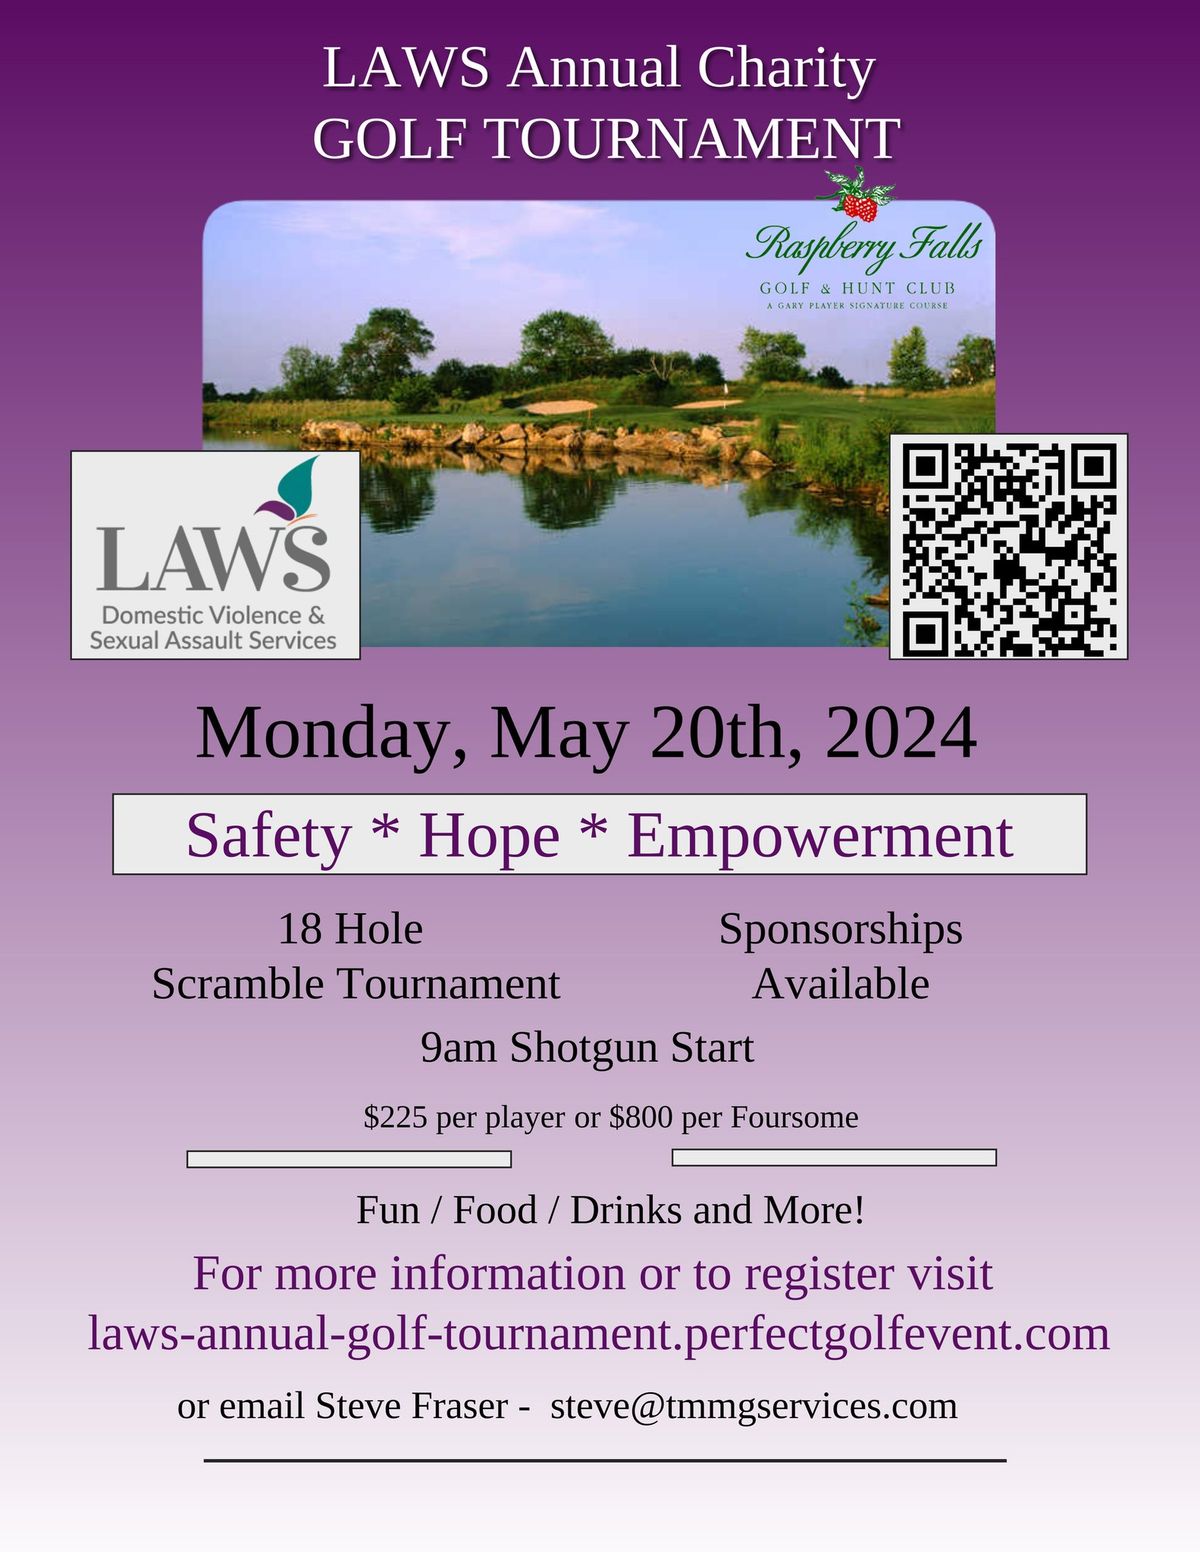 LAWS Annual Charity Golf Tournament